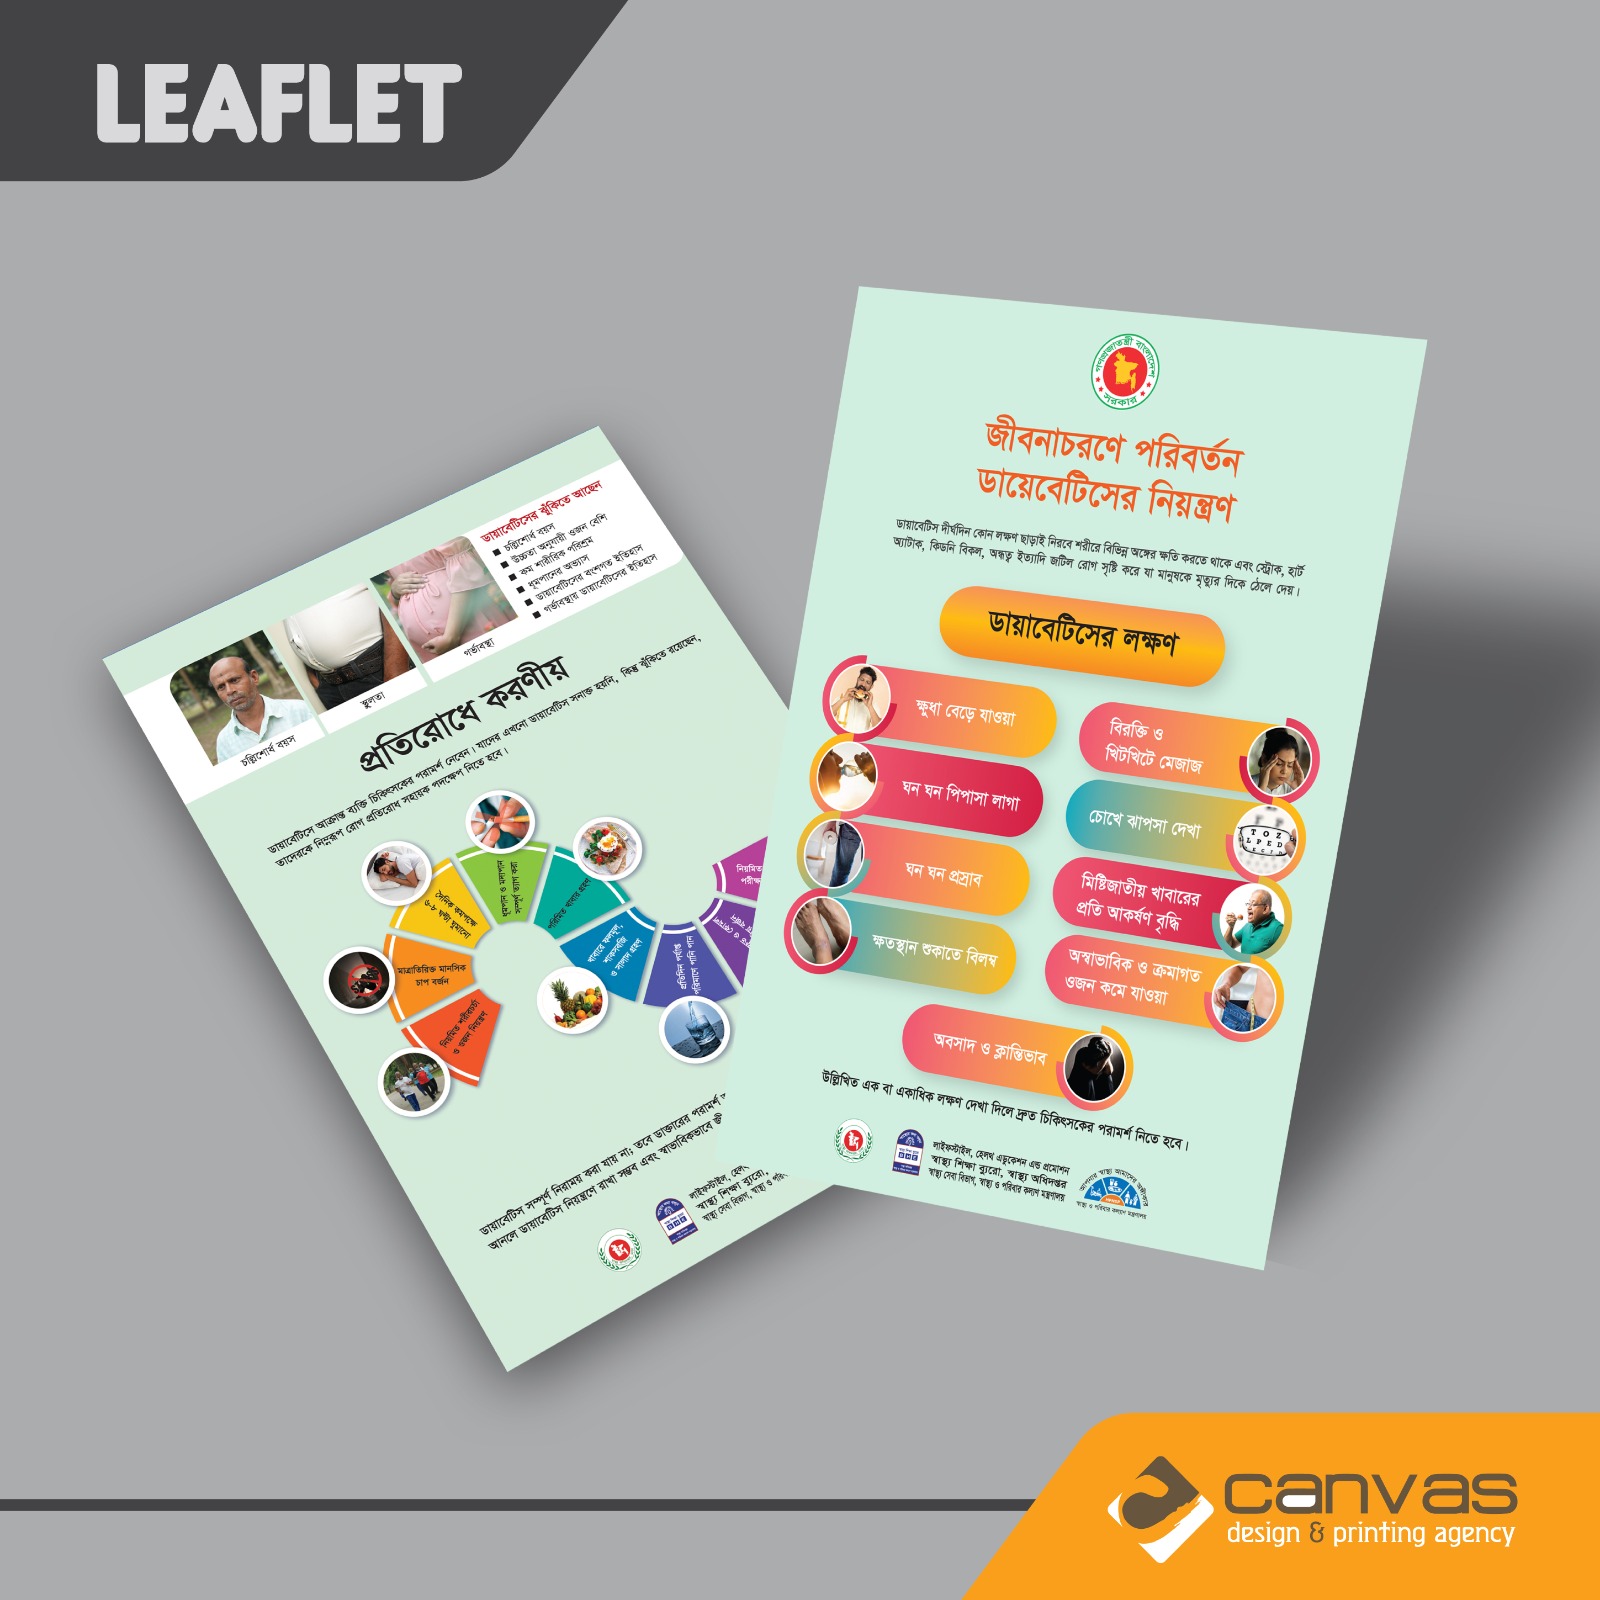 Your Trusted Leaflet and Flyer Printing Partner in Bangladesh